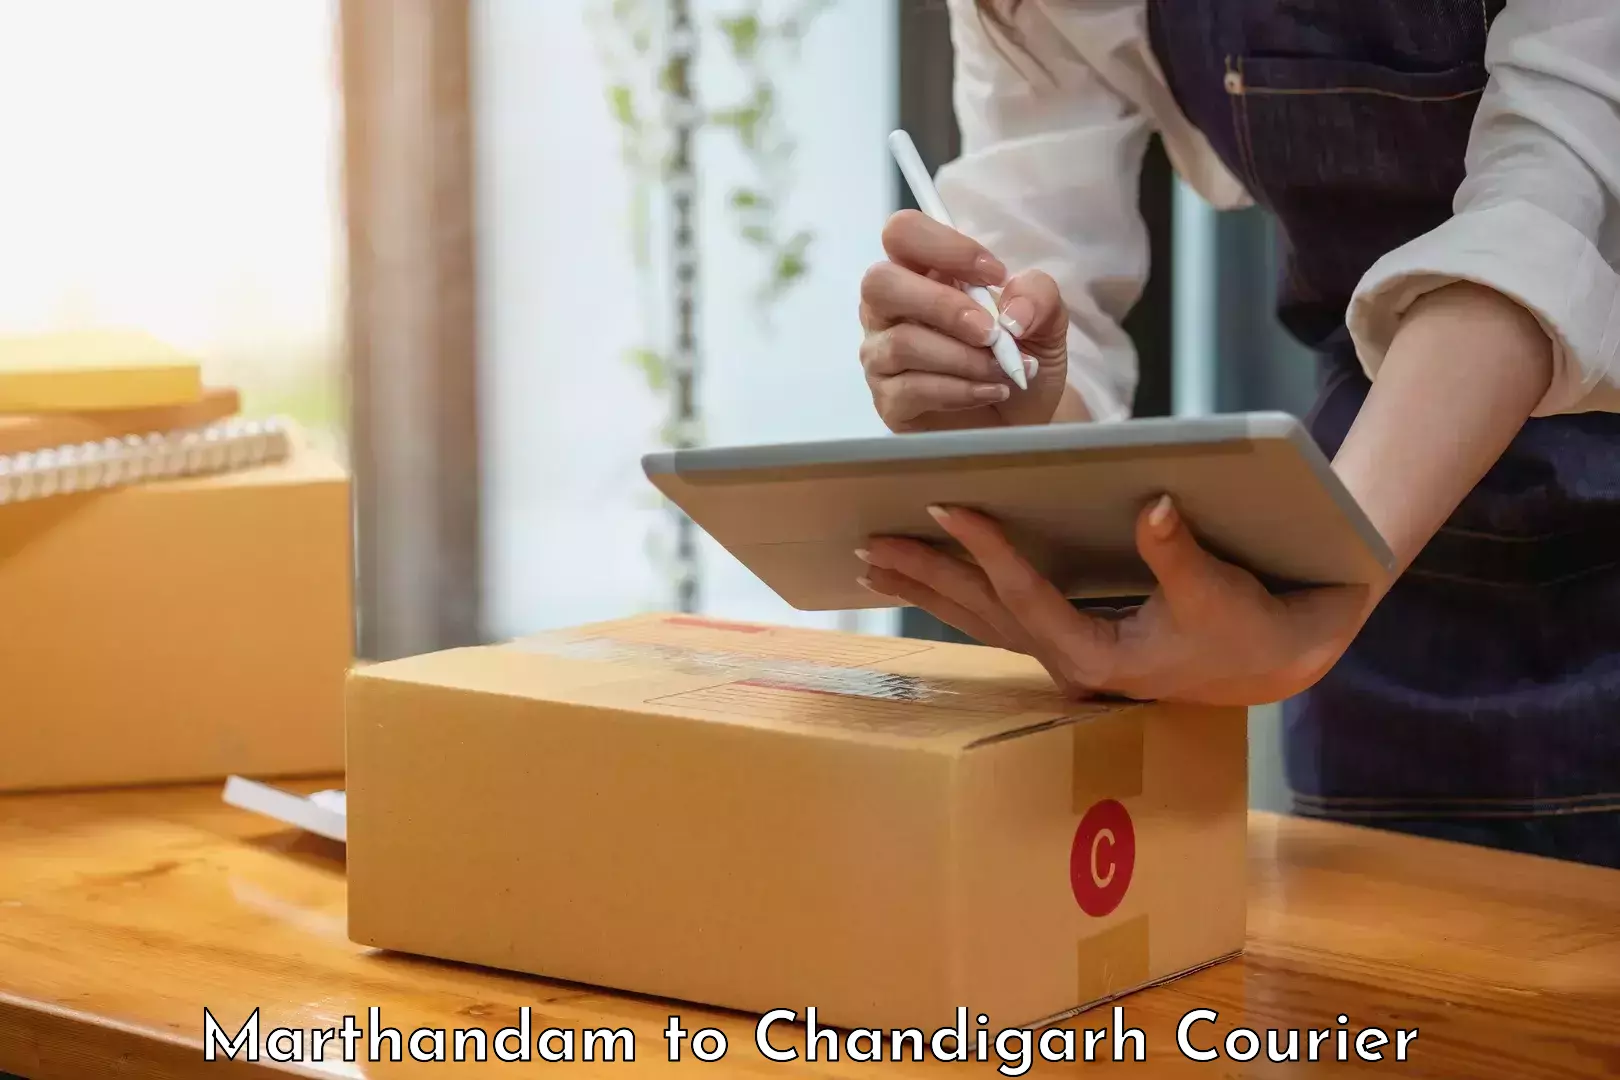 User-friendly delivery service Marthandam to Chandigarh